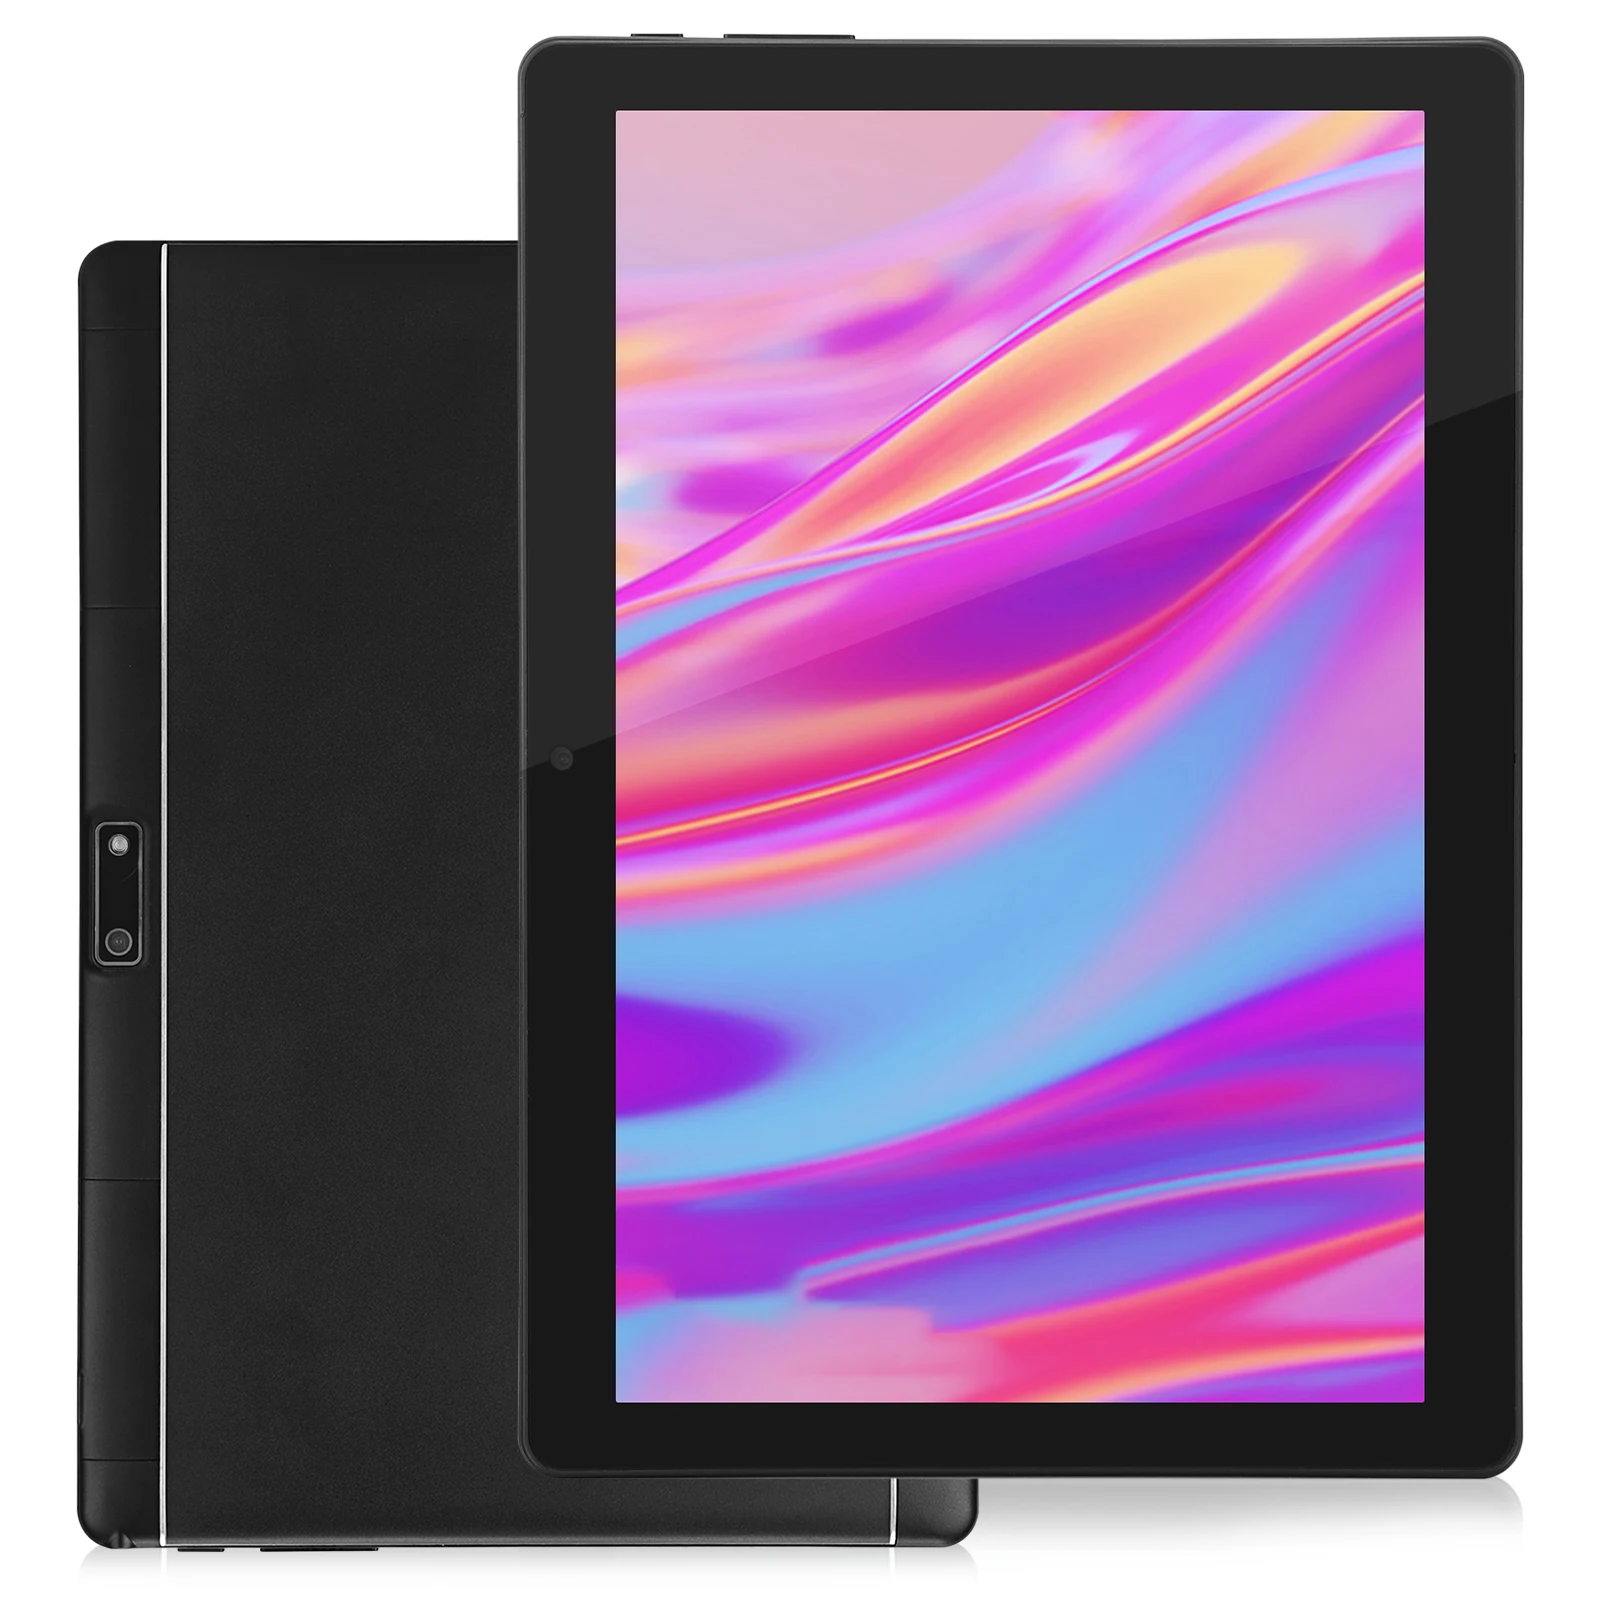 

Veidoo Tablet 10 inch Android 10.0 Quad-Core 32GB ROM Tablet Computer 10.1'' IPS HD WIFI 3G Tablet Pc with Sim Card Play Store